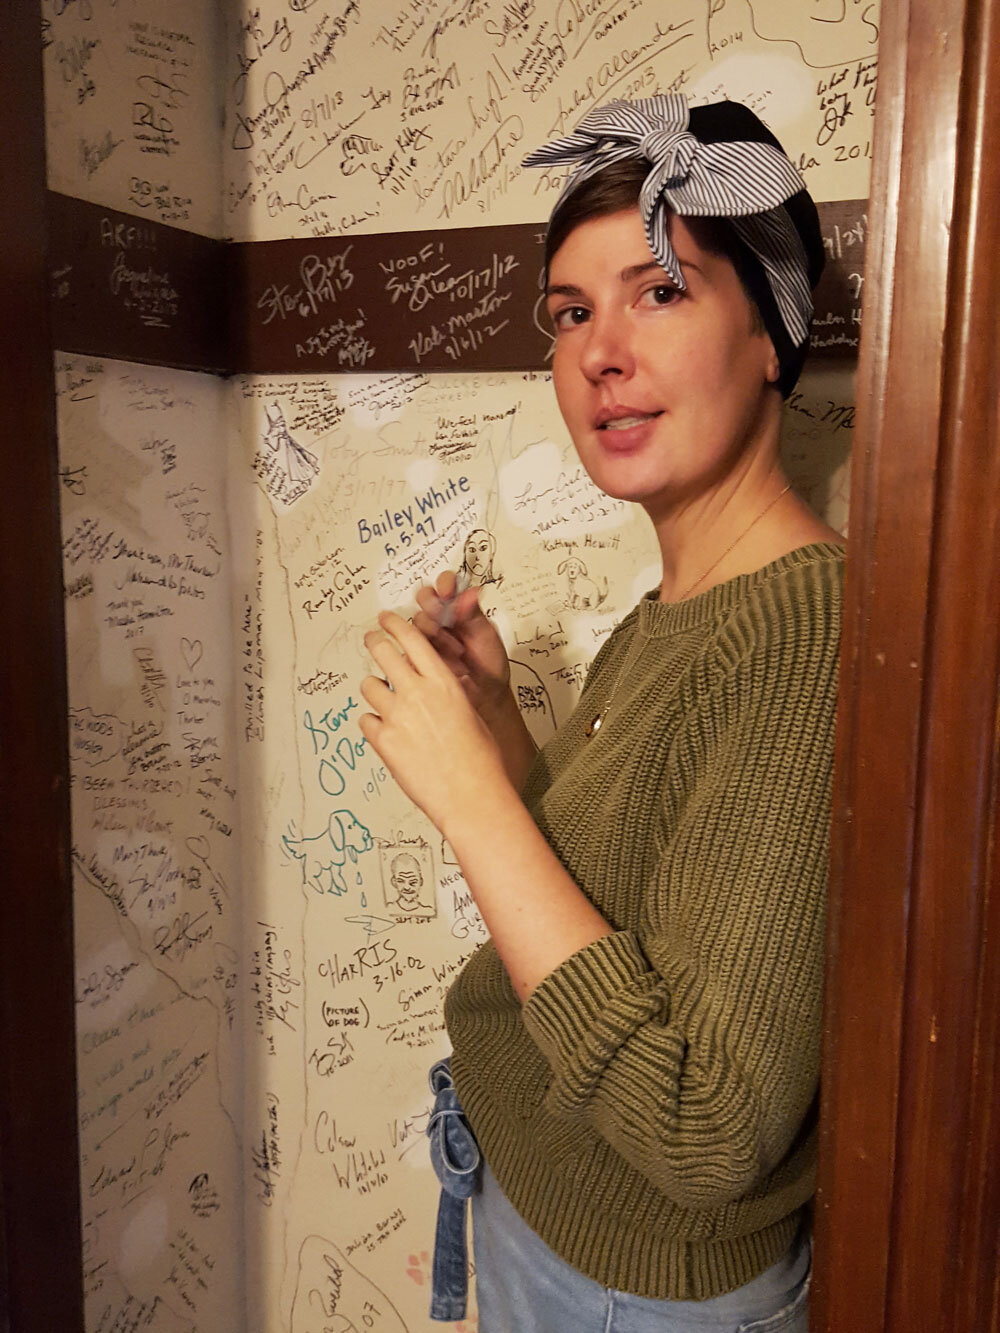  Thurber Prize winner Patricia Lockwood signs the Thurber House closet 